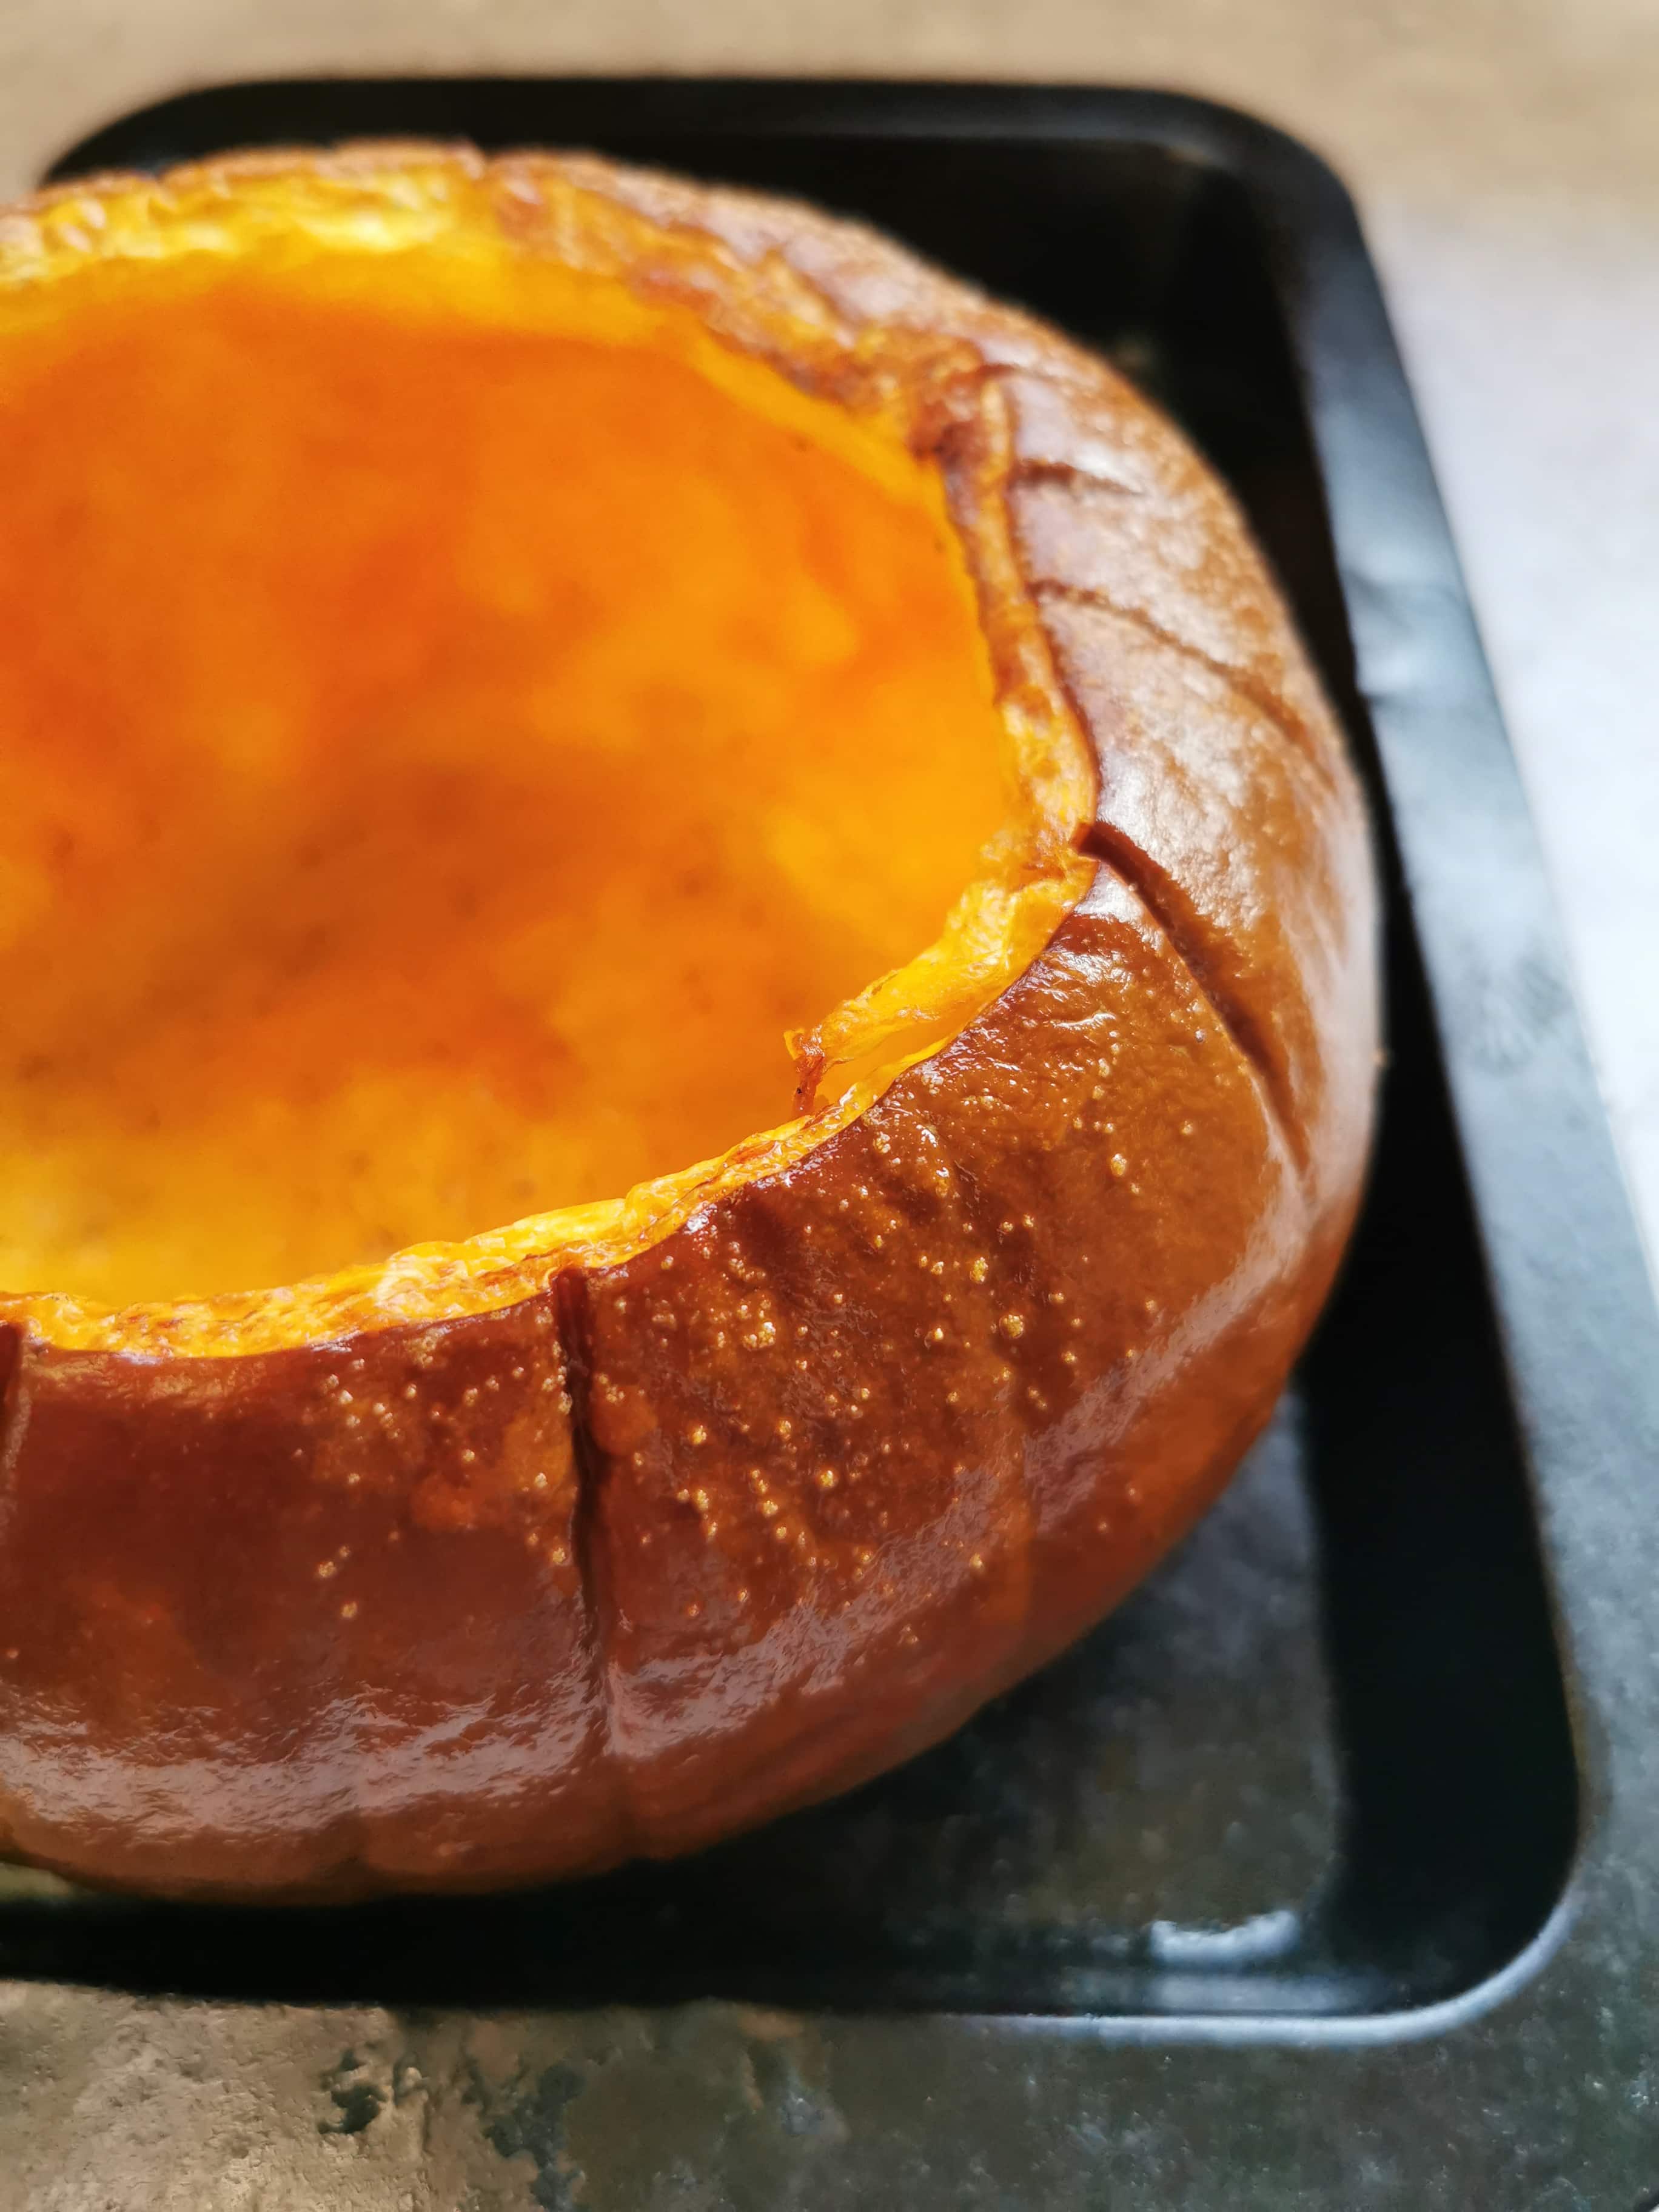 A pumpkin with the seeds scraped out in a baking tin ready for roasting.